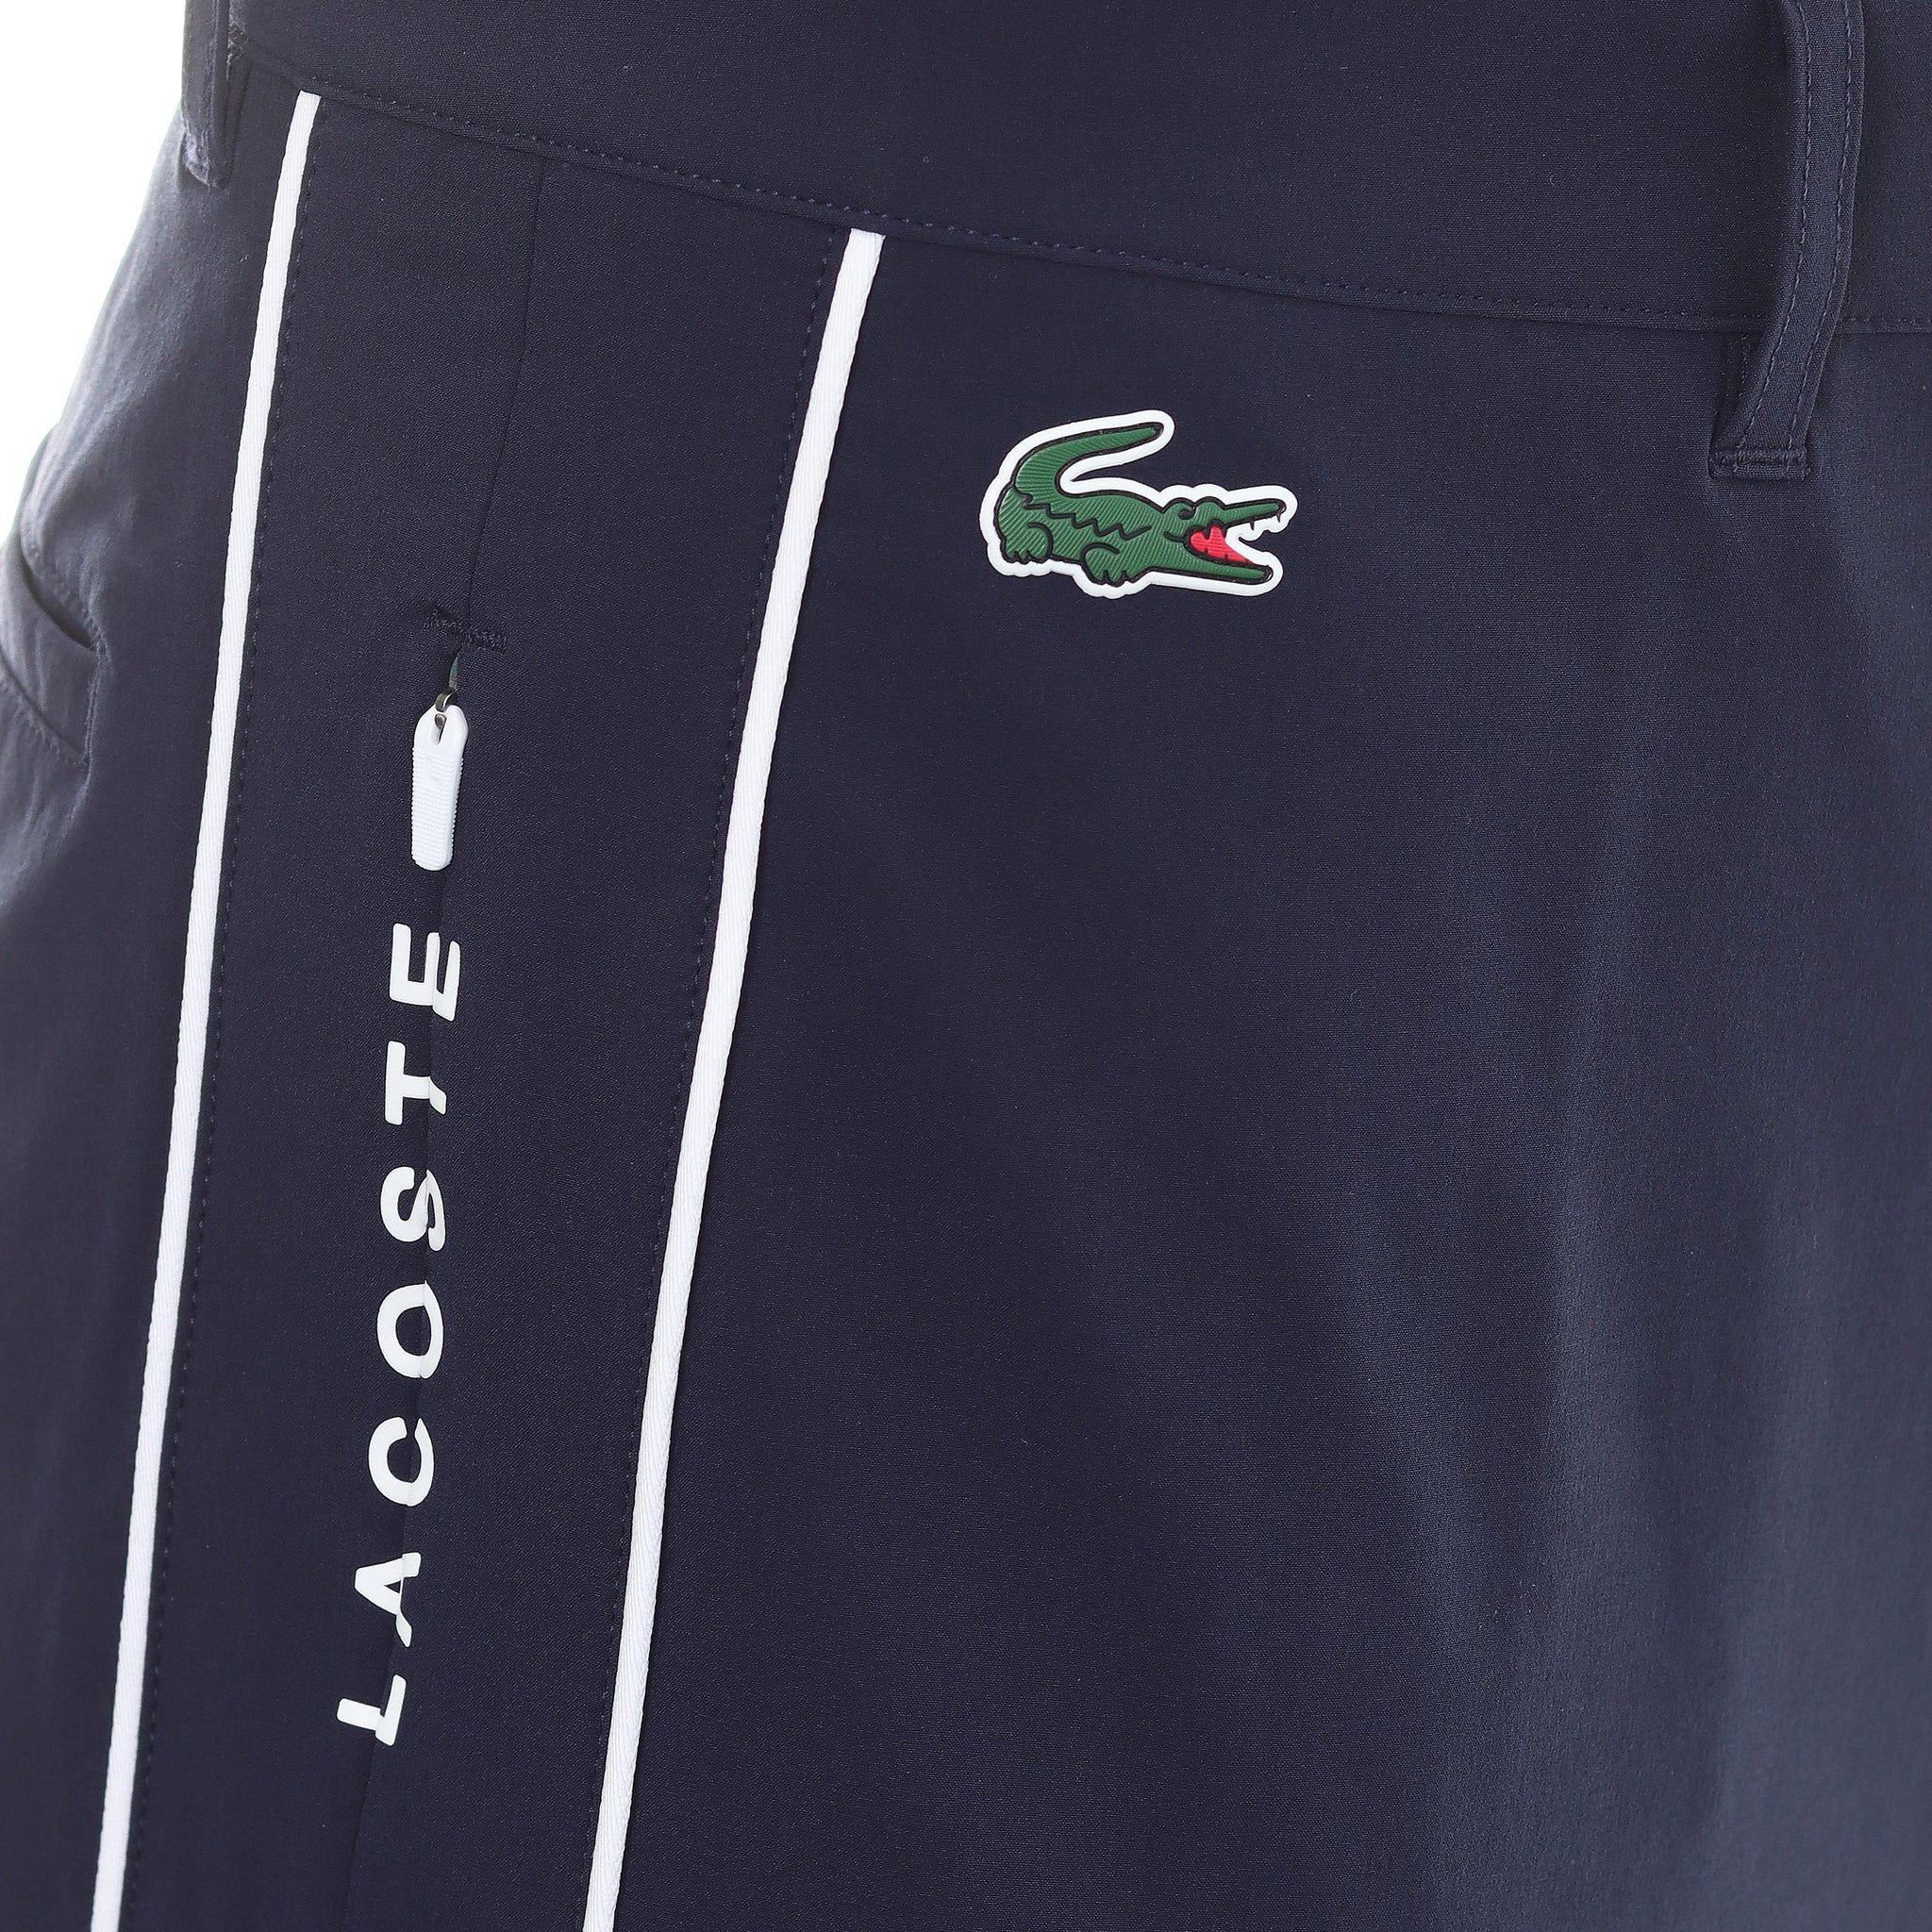 Lacoste Sport Stretch Piped Pants HH0856 Navy 525 | Function18 | Restrictedgs